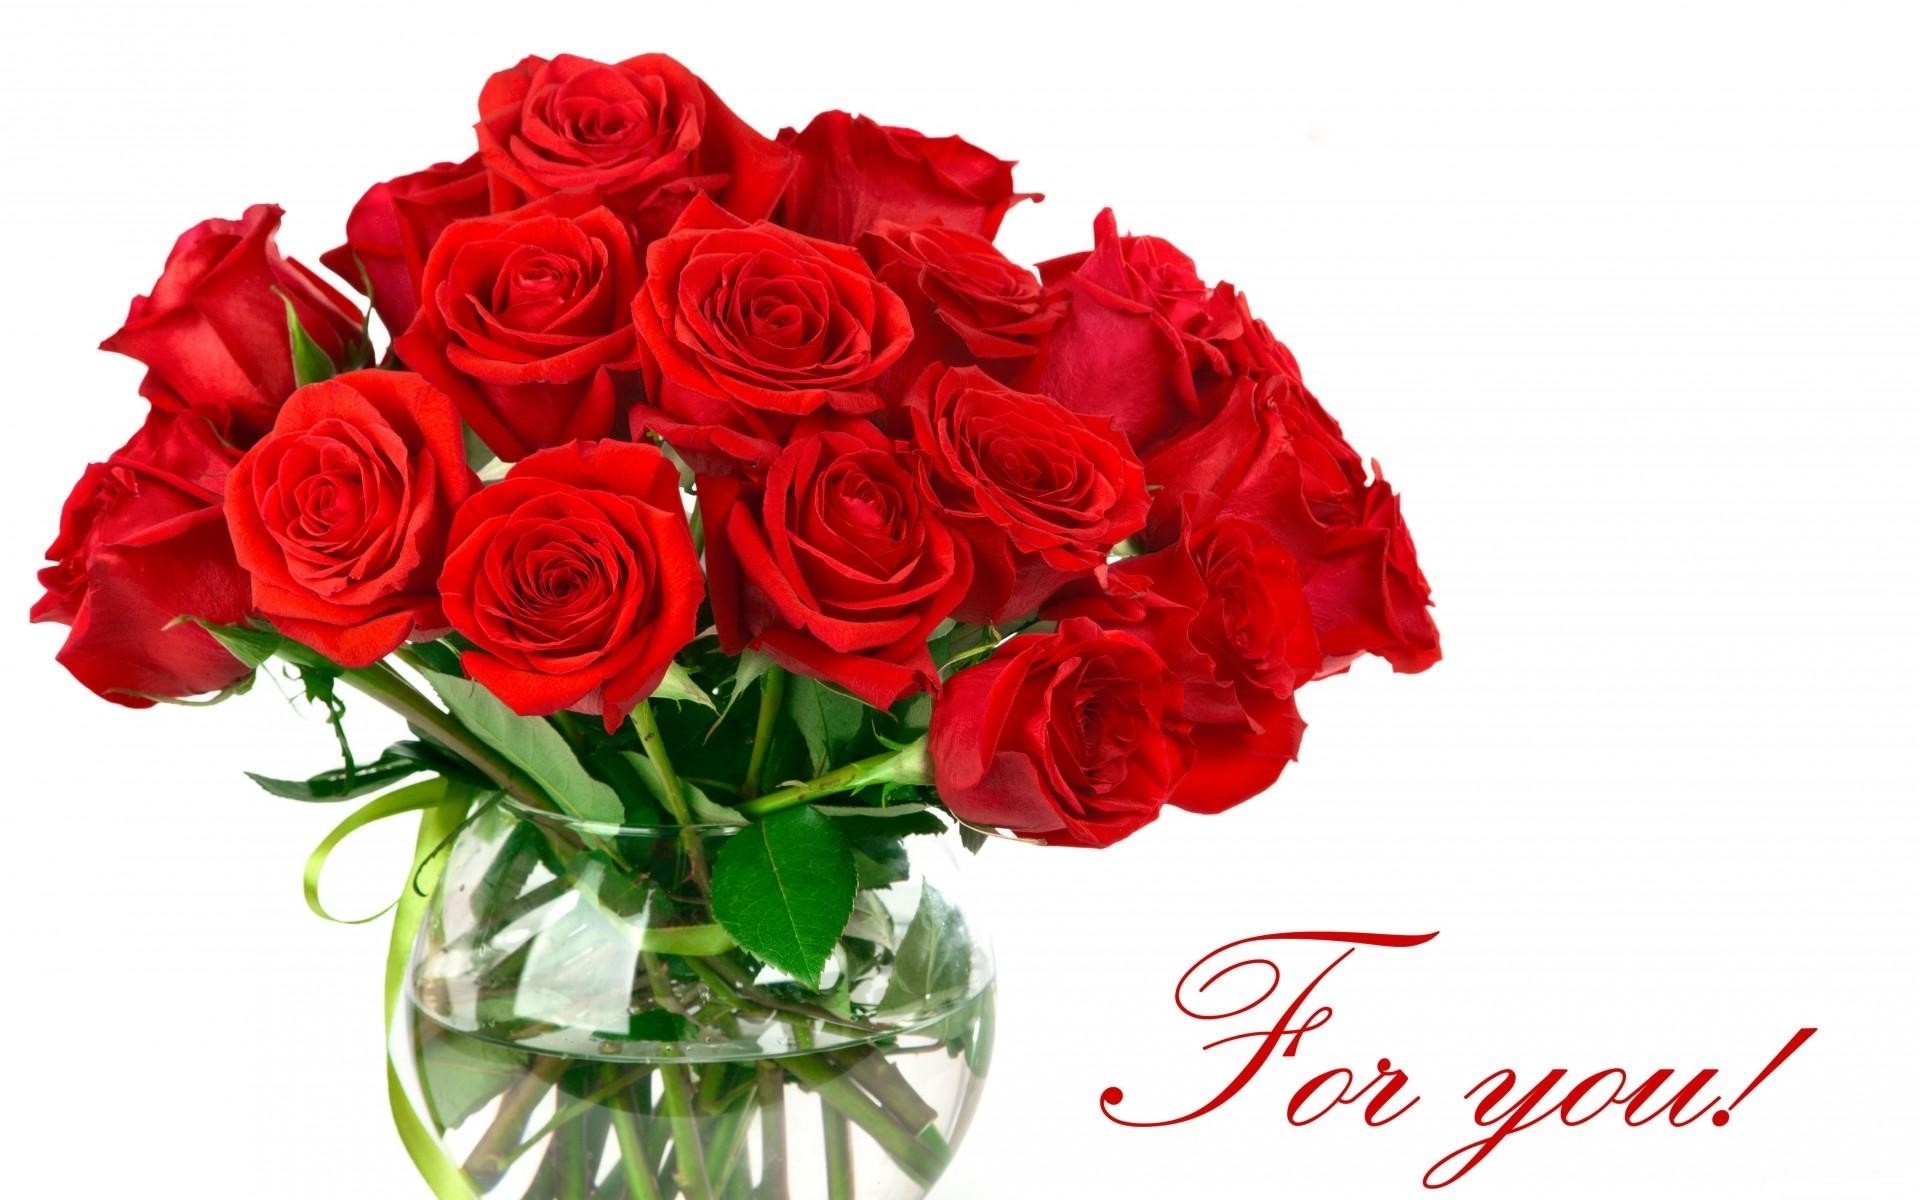 1920x1200 rose bouquet pictures | ... background inscription white red roses bouquet  bright wallpapers image